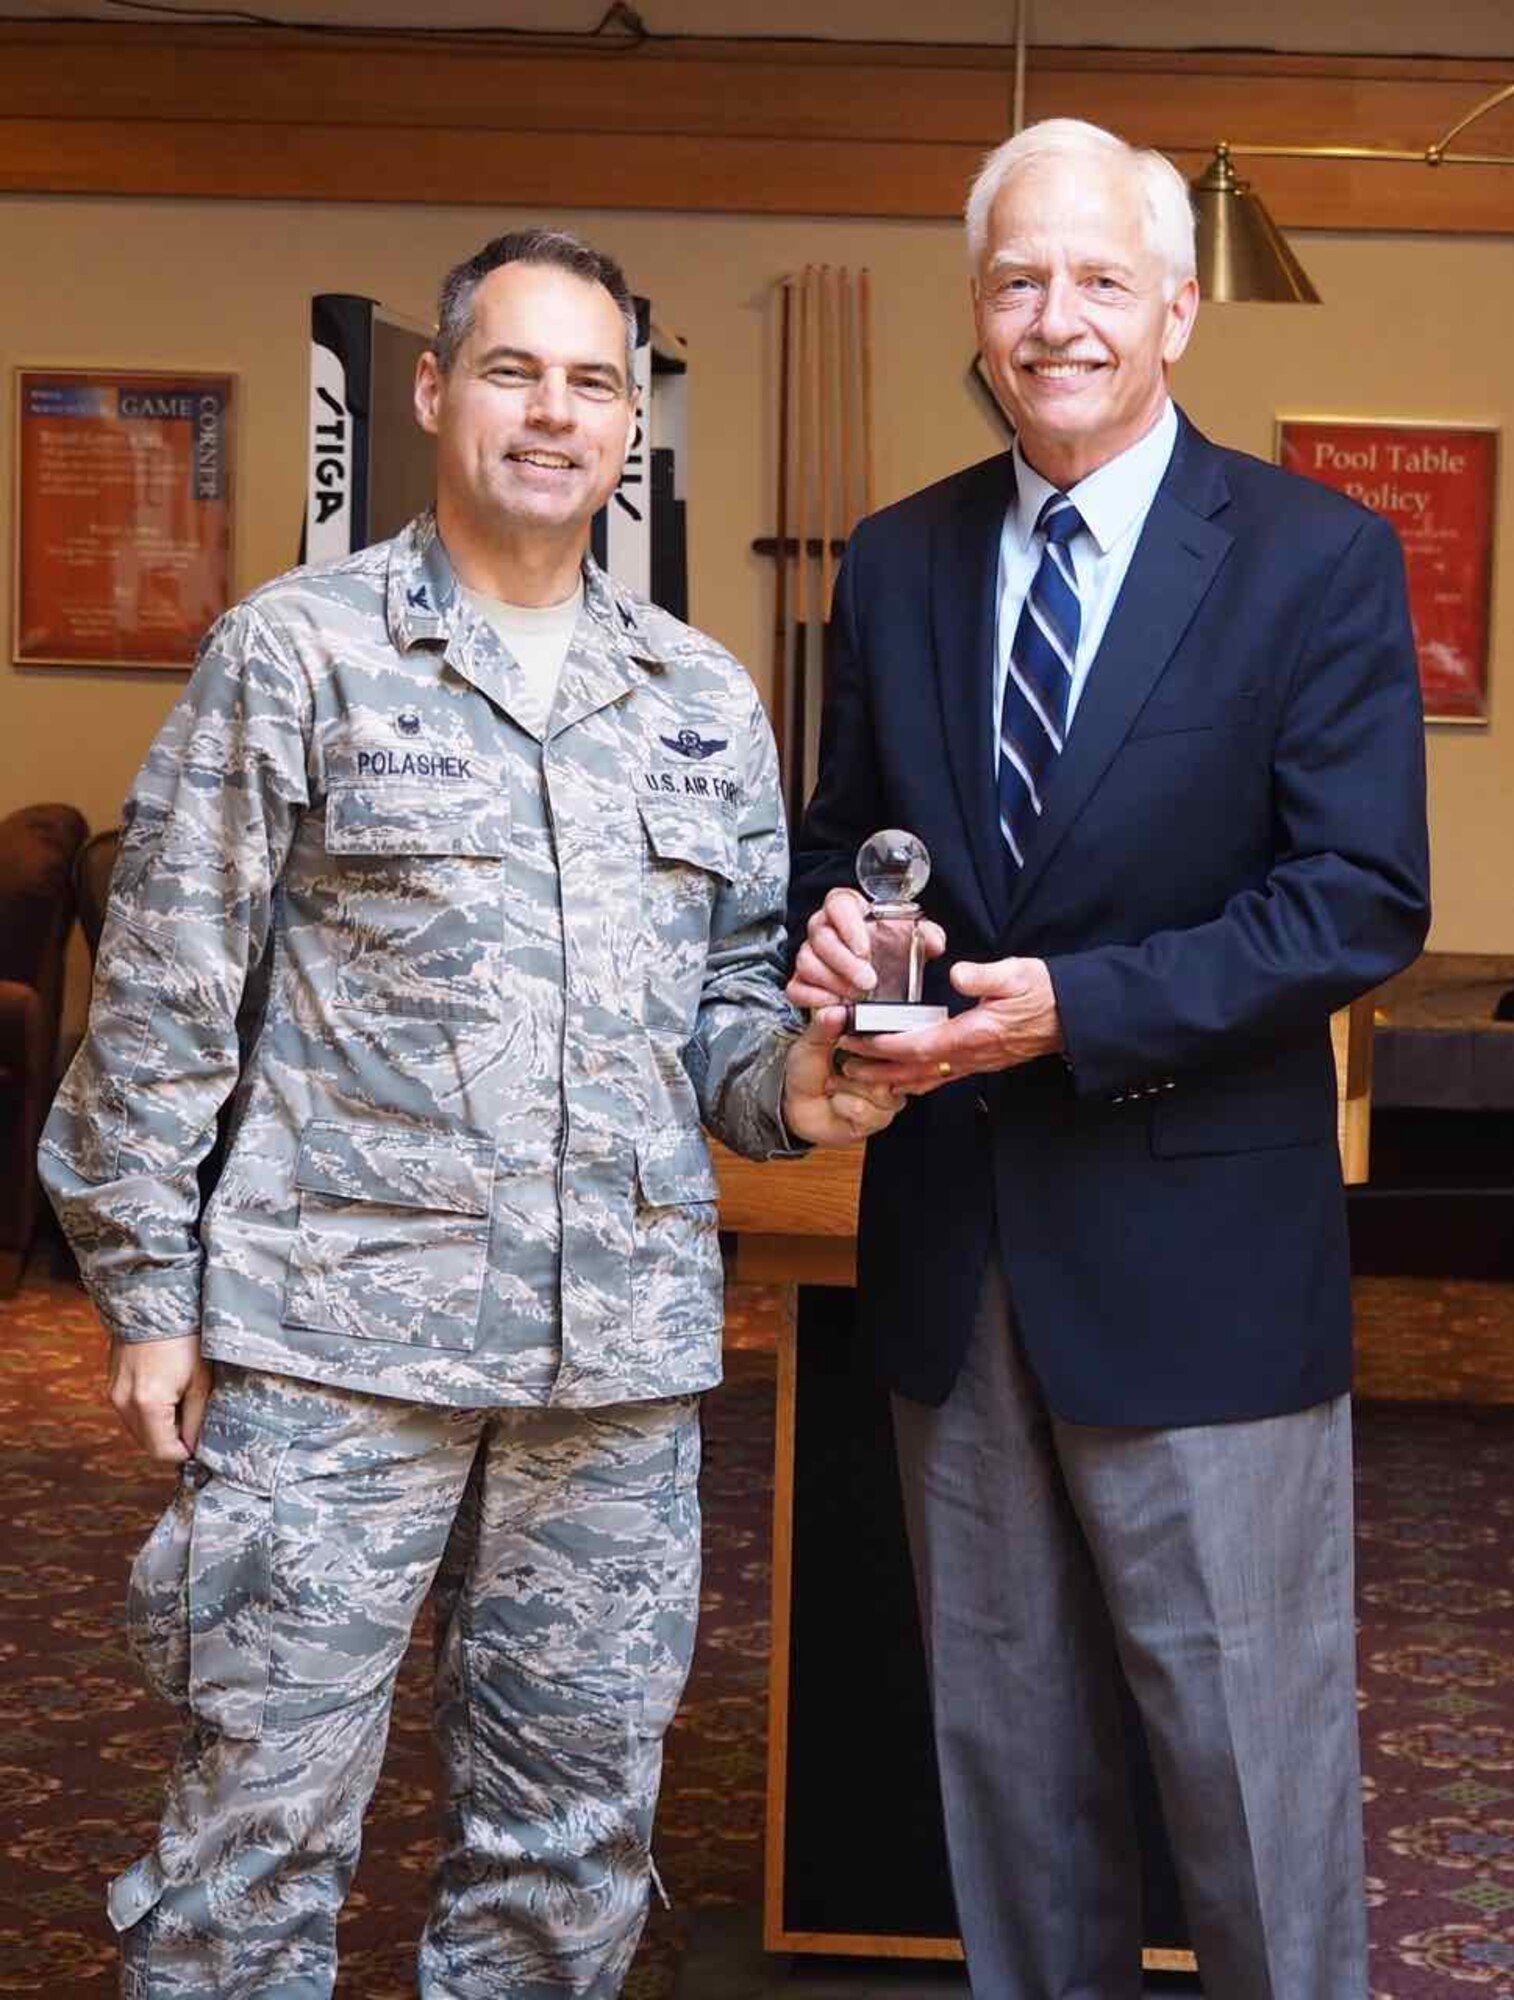 Mr. Jeff Hamiel is inducted into the Order of the Global Vikings as Col. Tony Polashek, 934th Airlift Wing commander, presents him with the crystal globe commemorating the event. For more than 35 years Hamiel has been an advocate for the 934th through his work as CEO of the Metropolitan Airports Commission. Hamiel also served for 20 years as a reservist at the 934th retiring after serving as the 96th Airlift Squadron commander. (Air Force Photo/Paul Zadach)

